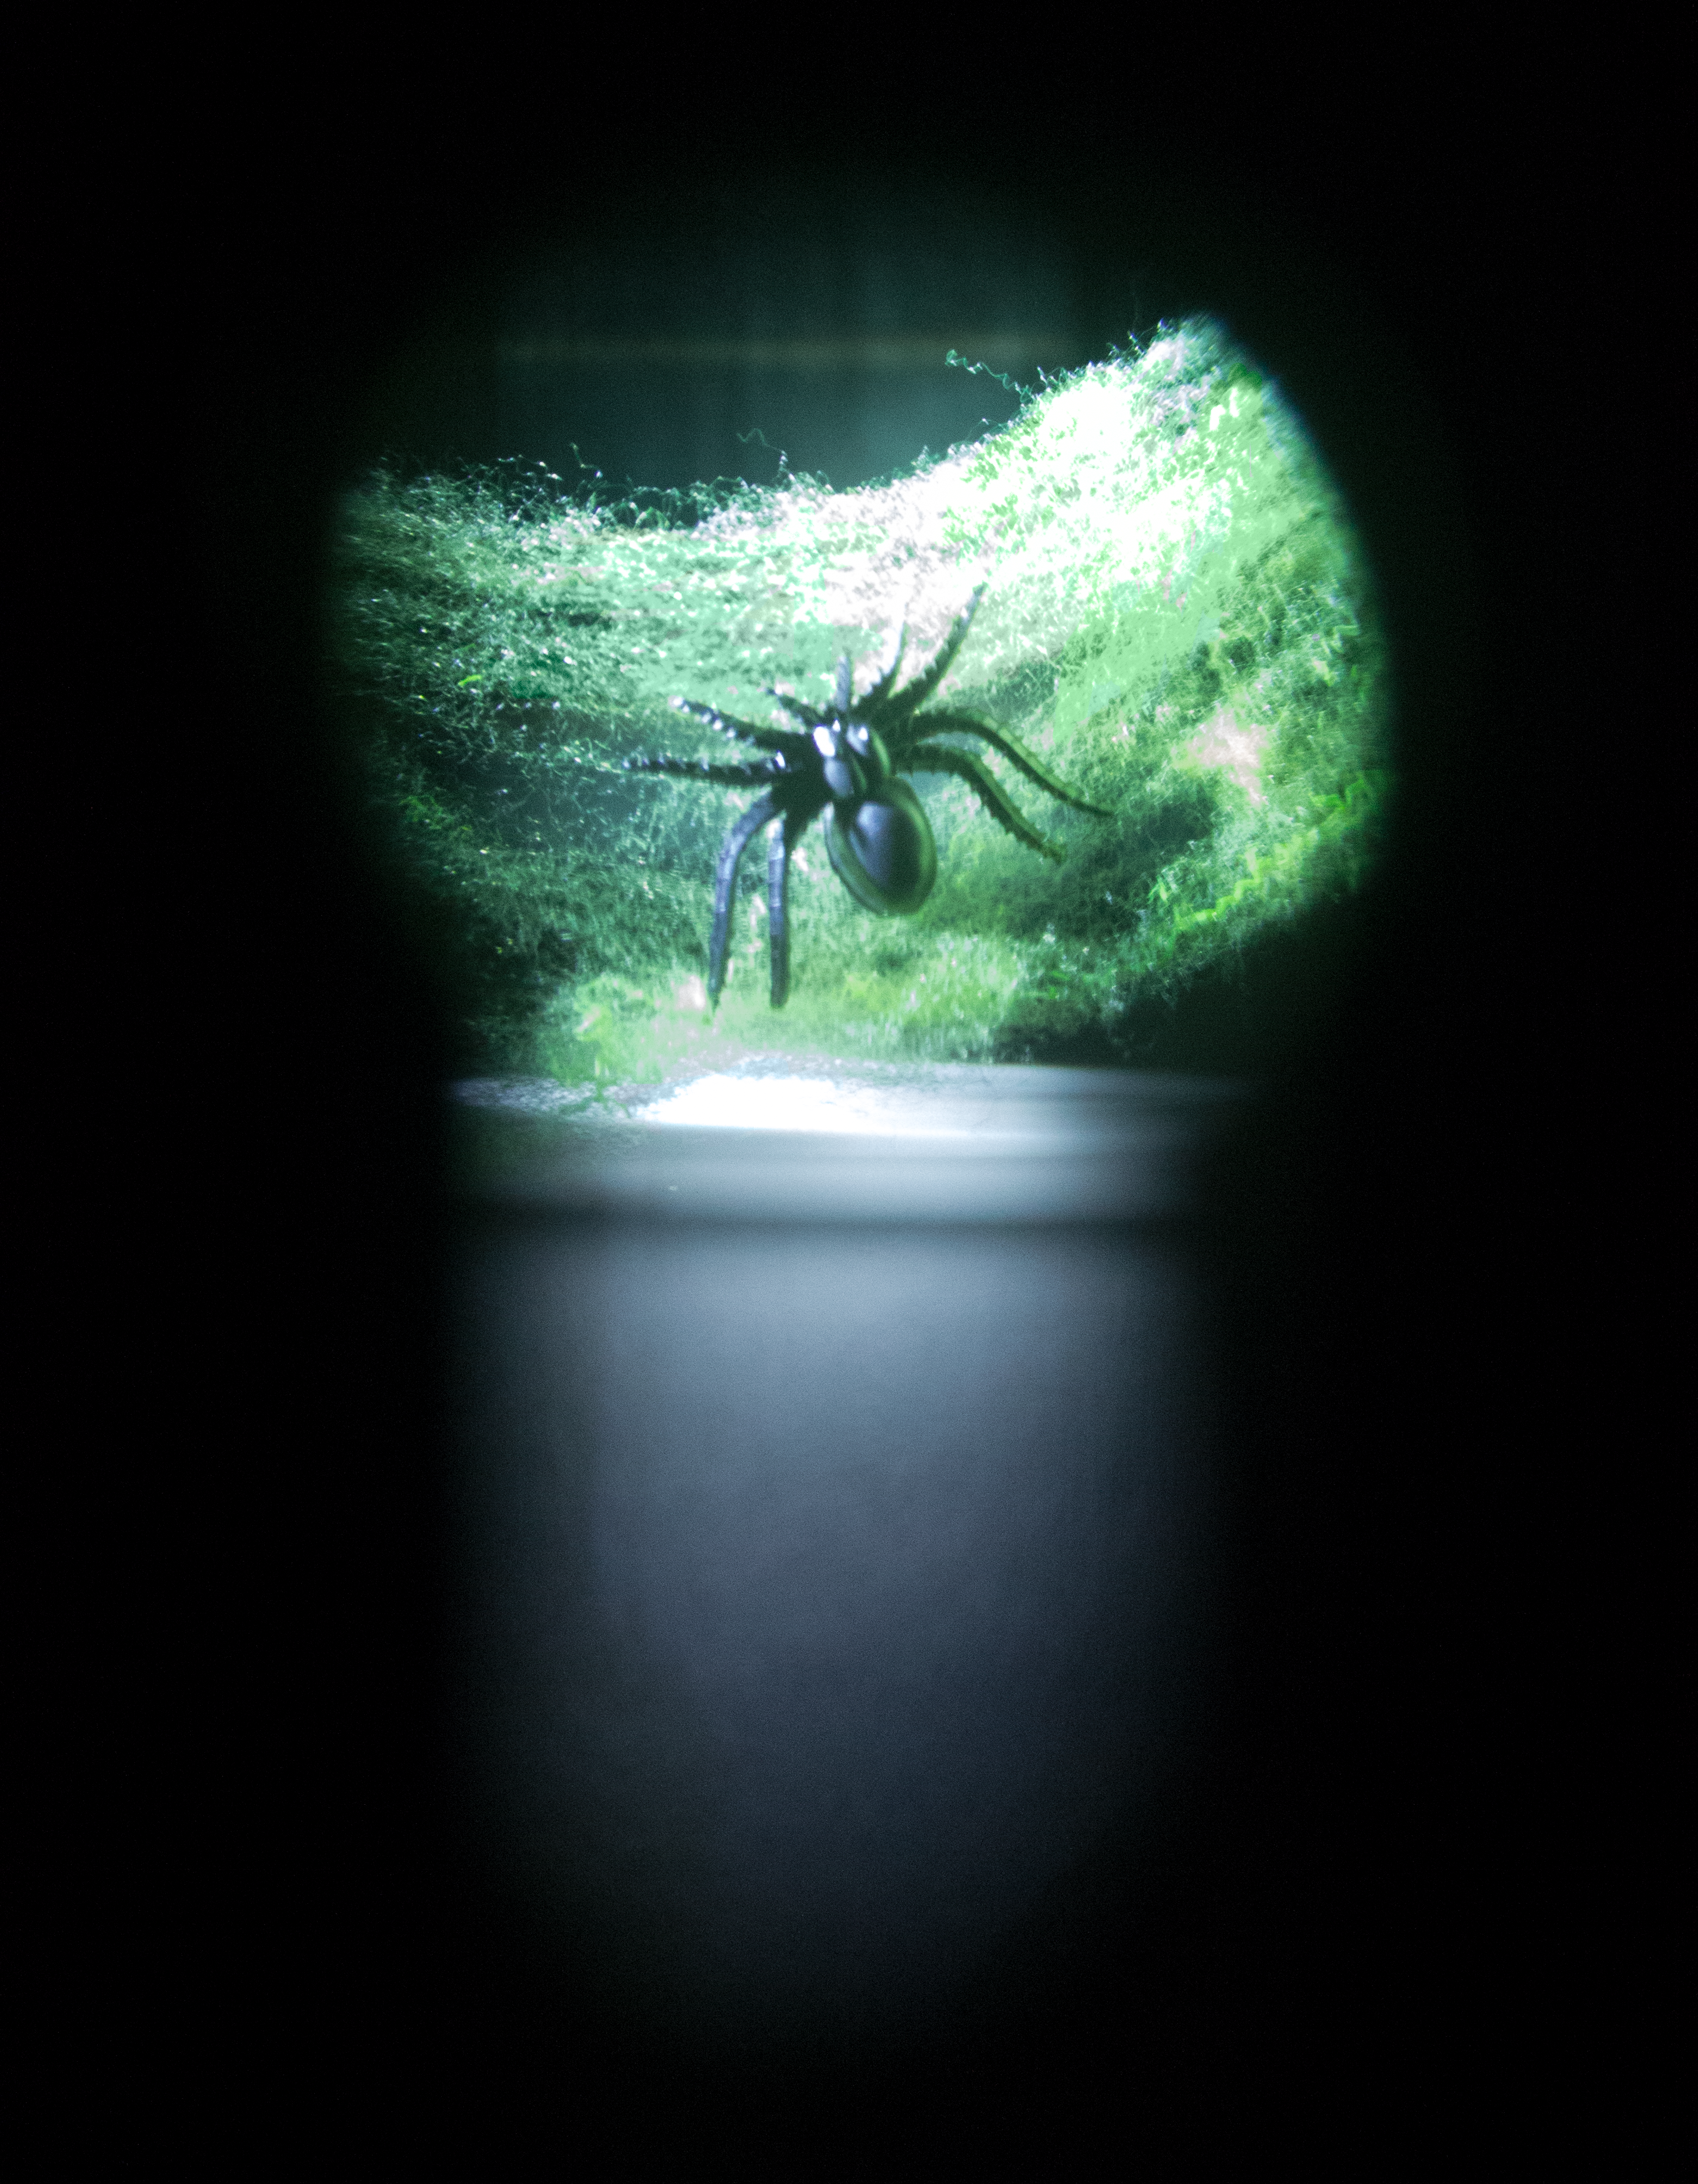 This is a photo of a spider while looking through a keyhole.